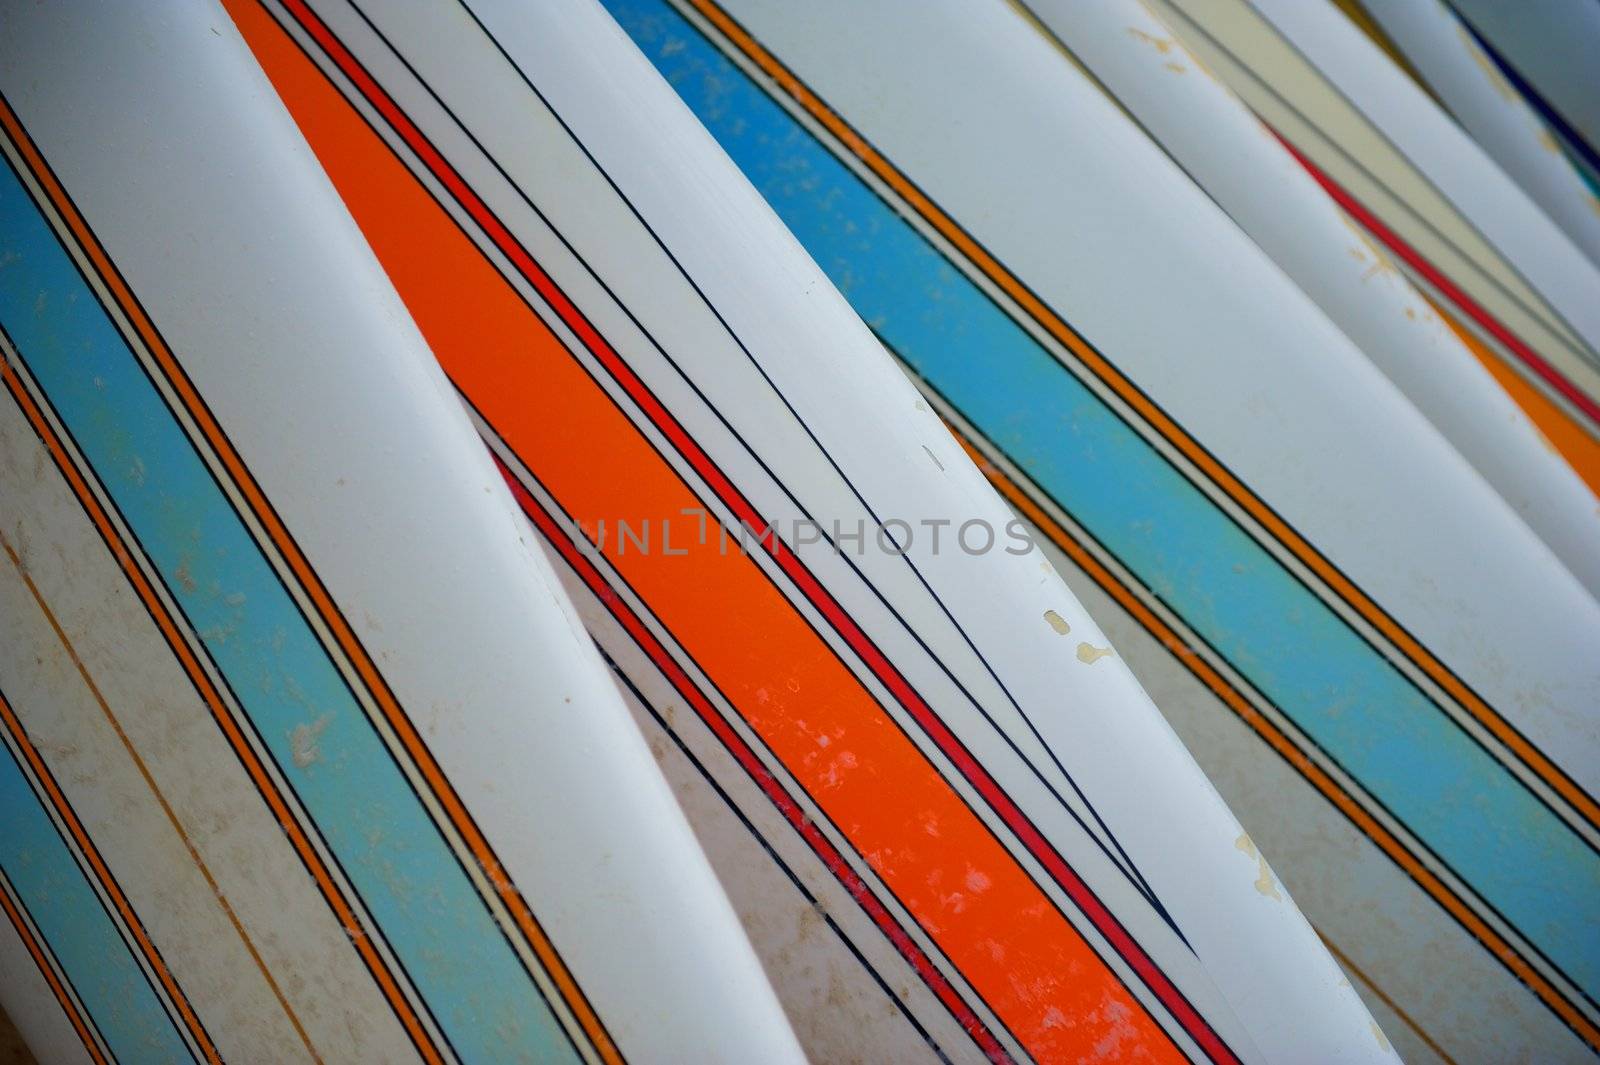 Row of Striped Surfboards by pixelsnap